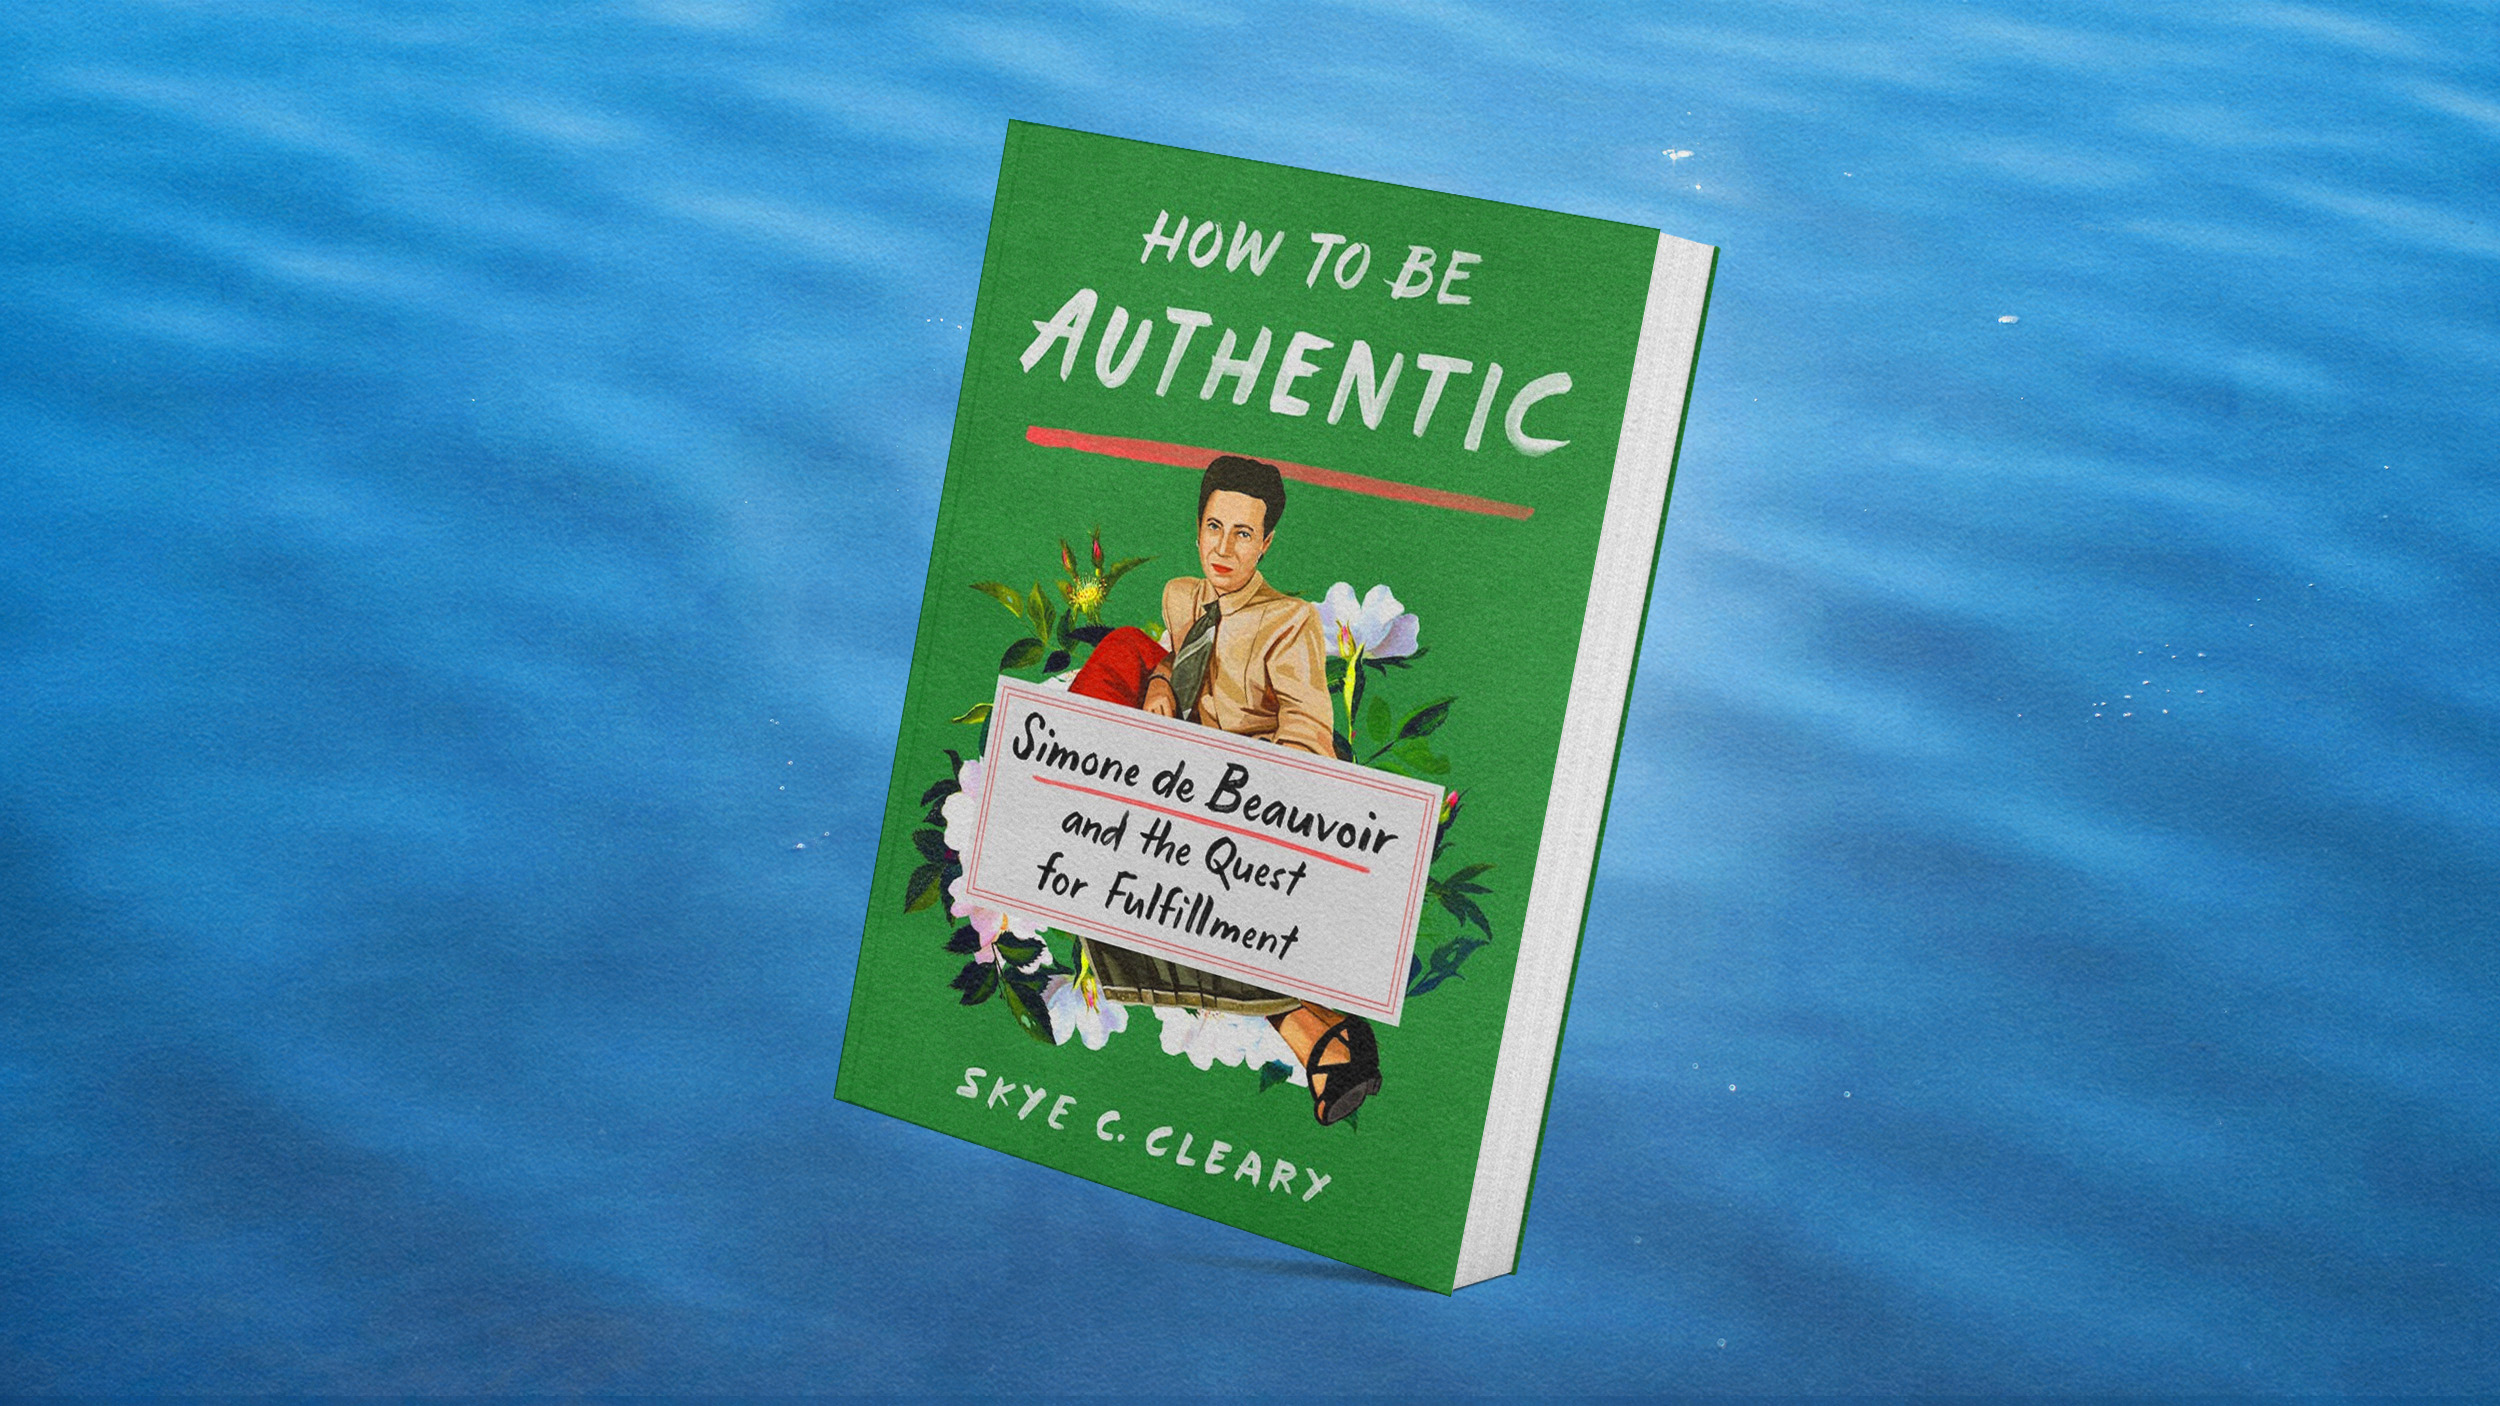 A book titled "How To Be Authentic: Simone de Beauvoir and the Quest for Fulfillment" by Skye C. Cleary, exploring the path to happiness, is displayed against a background of rippling water.